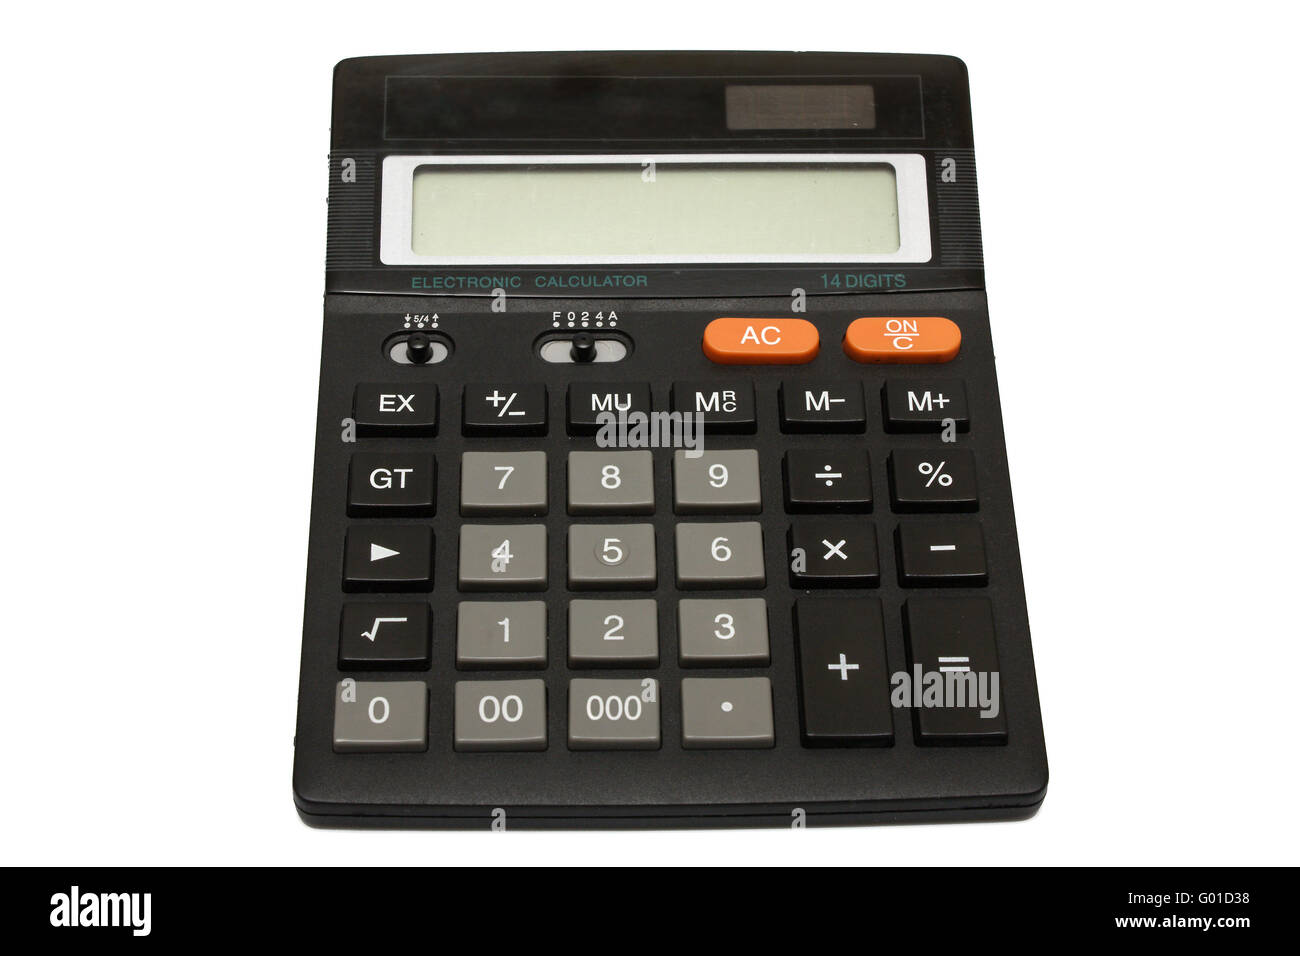 The black calculator on a white background is isolated Stock Photo